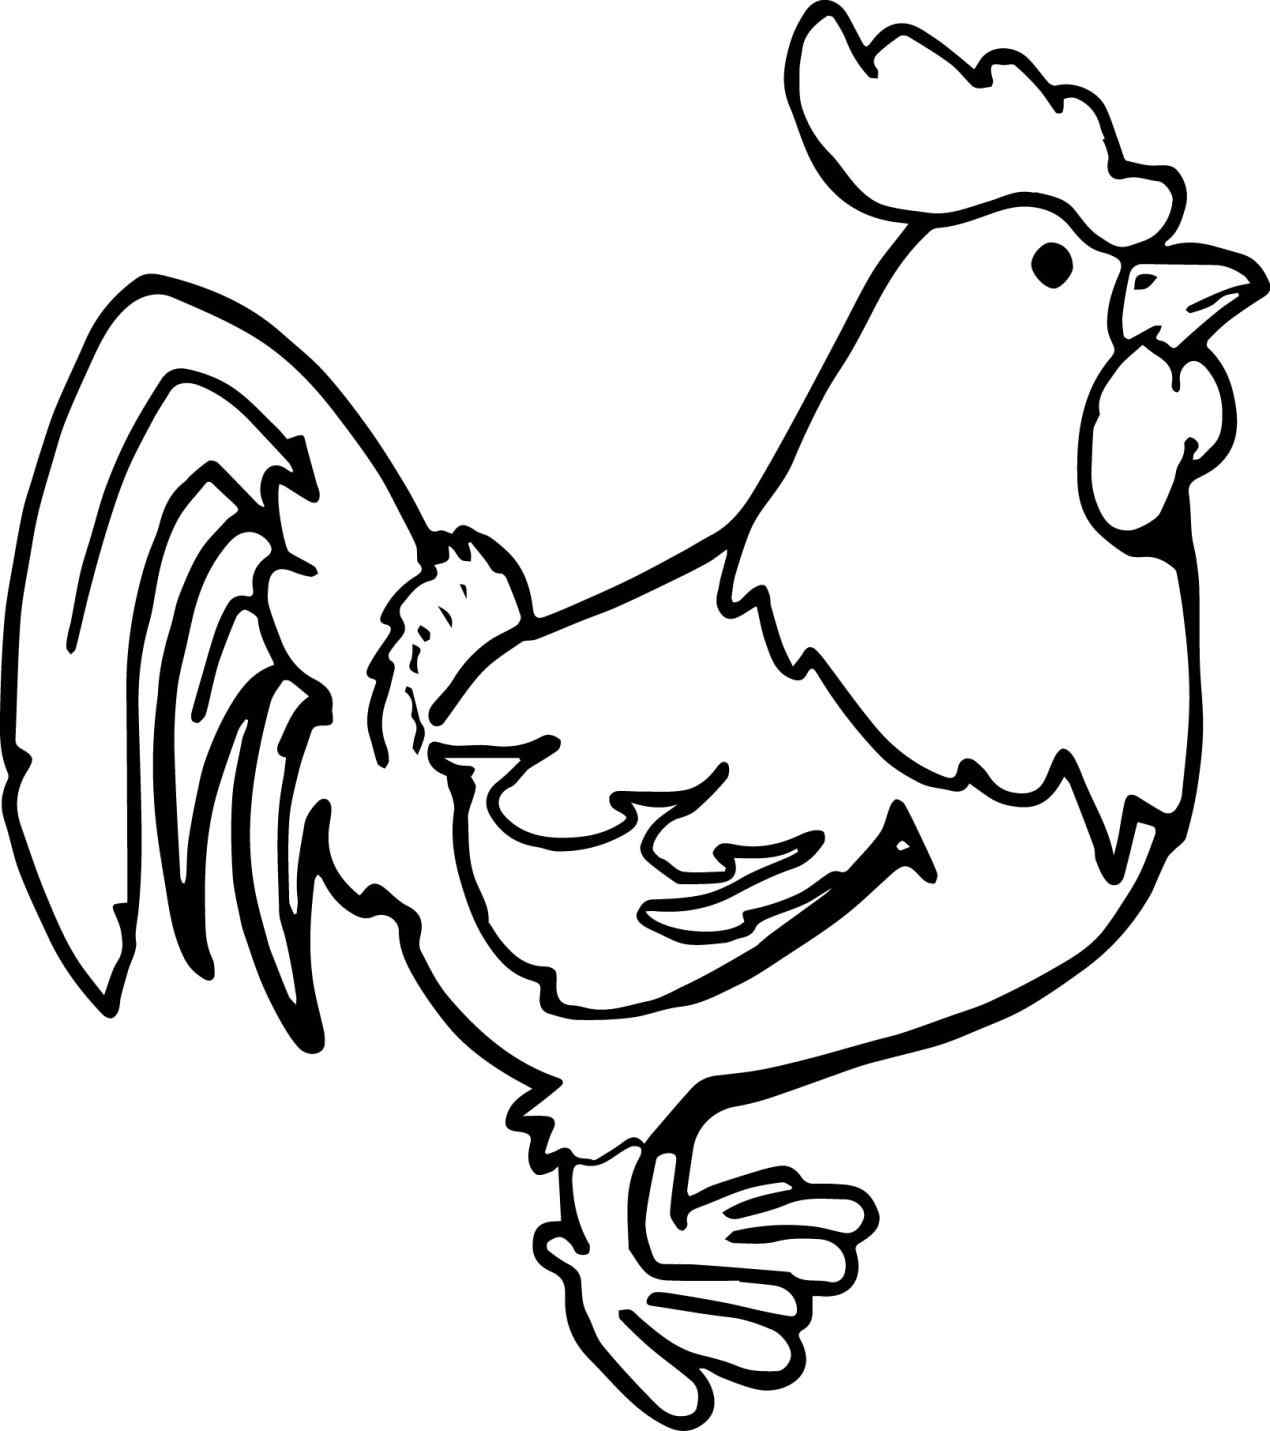 Chicken Nuggets Coloring Sheet Coloring Pages